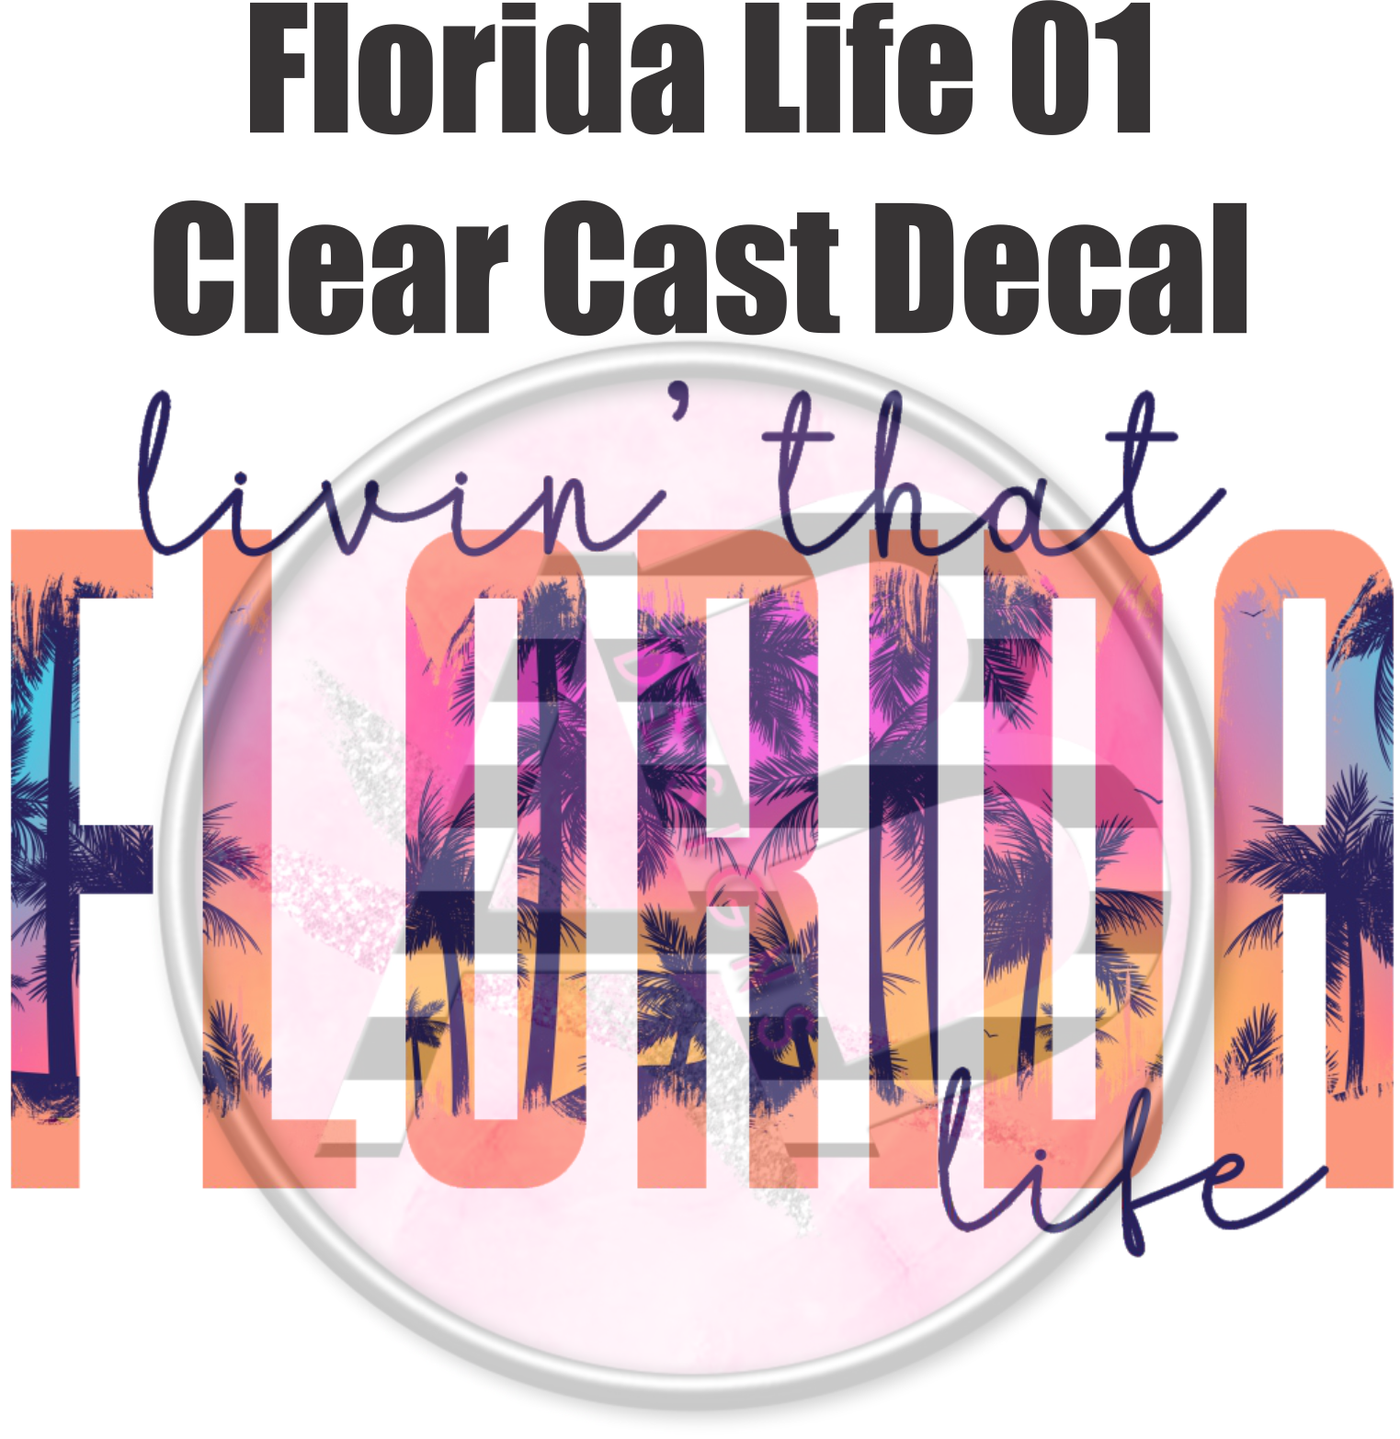 Florida Life 01 - Clear Cast Decal